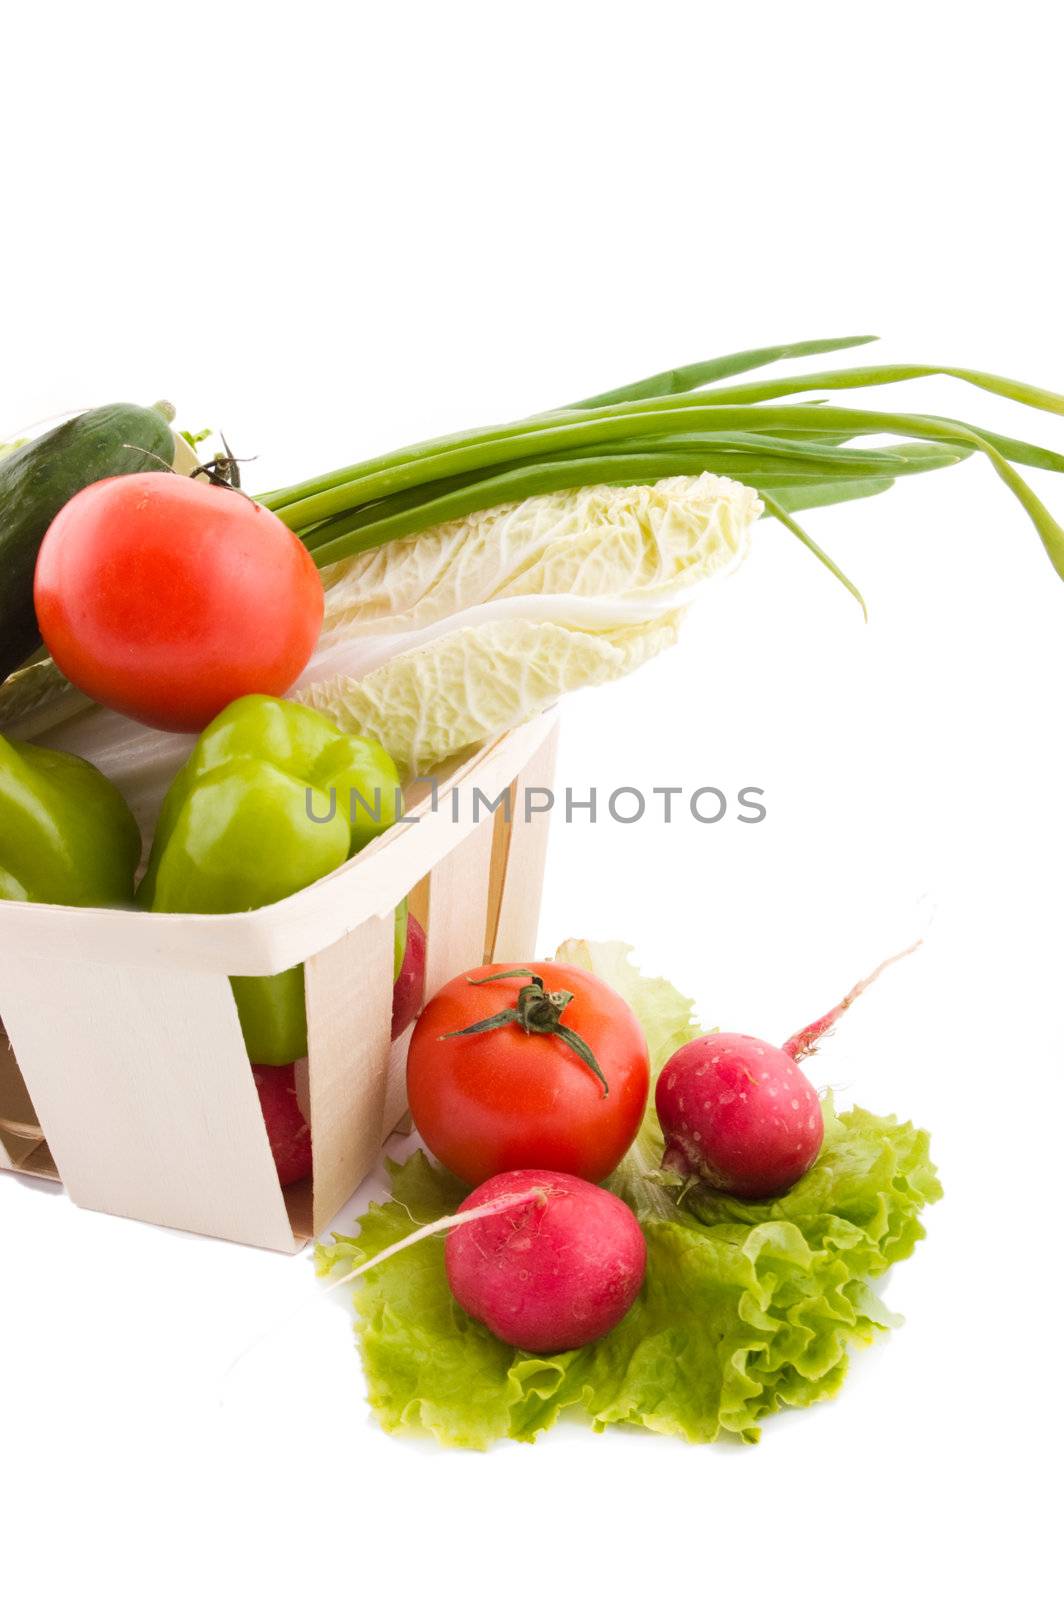 Wattled basket with vegetable over white